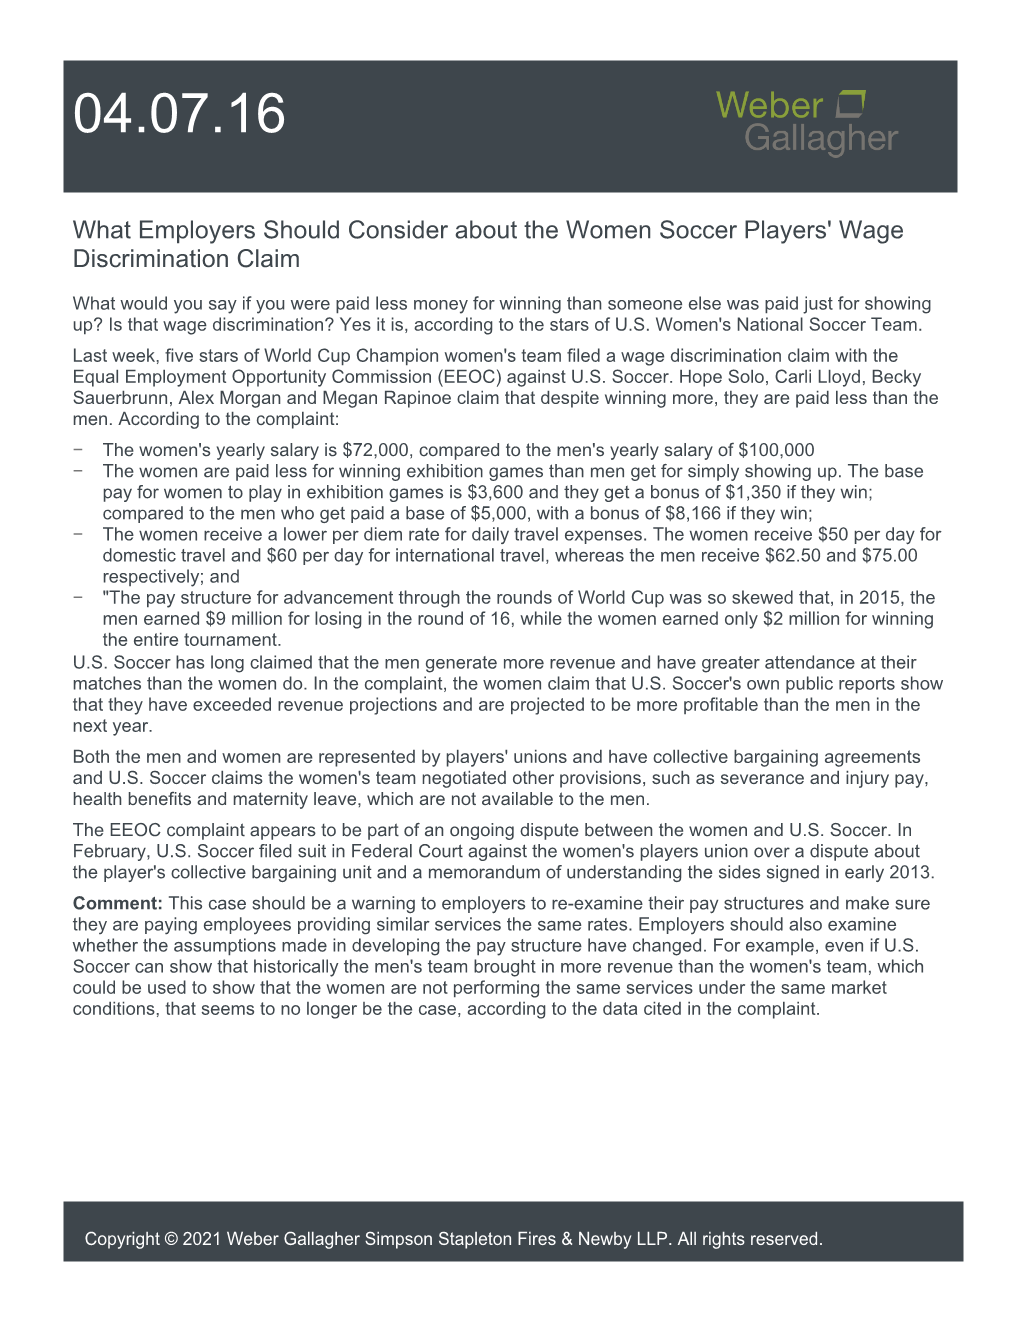 What Employers Should Consider About the Women Soccer Players' Wage Discrimination Claim